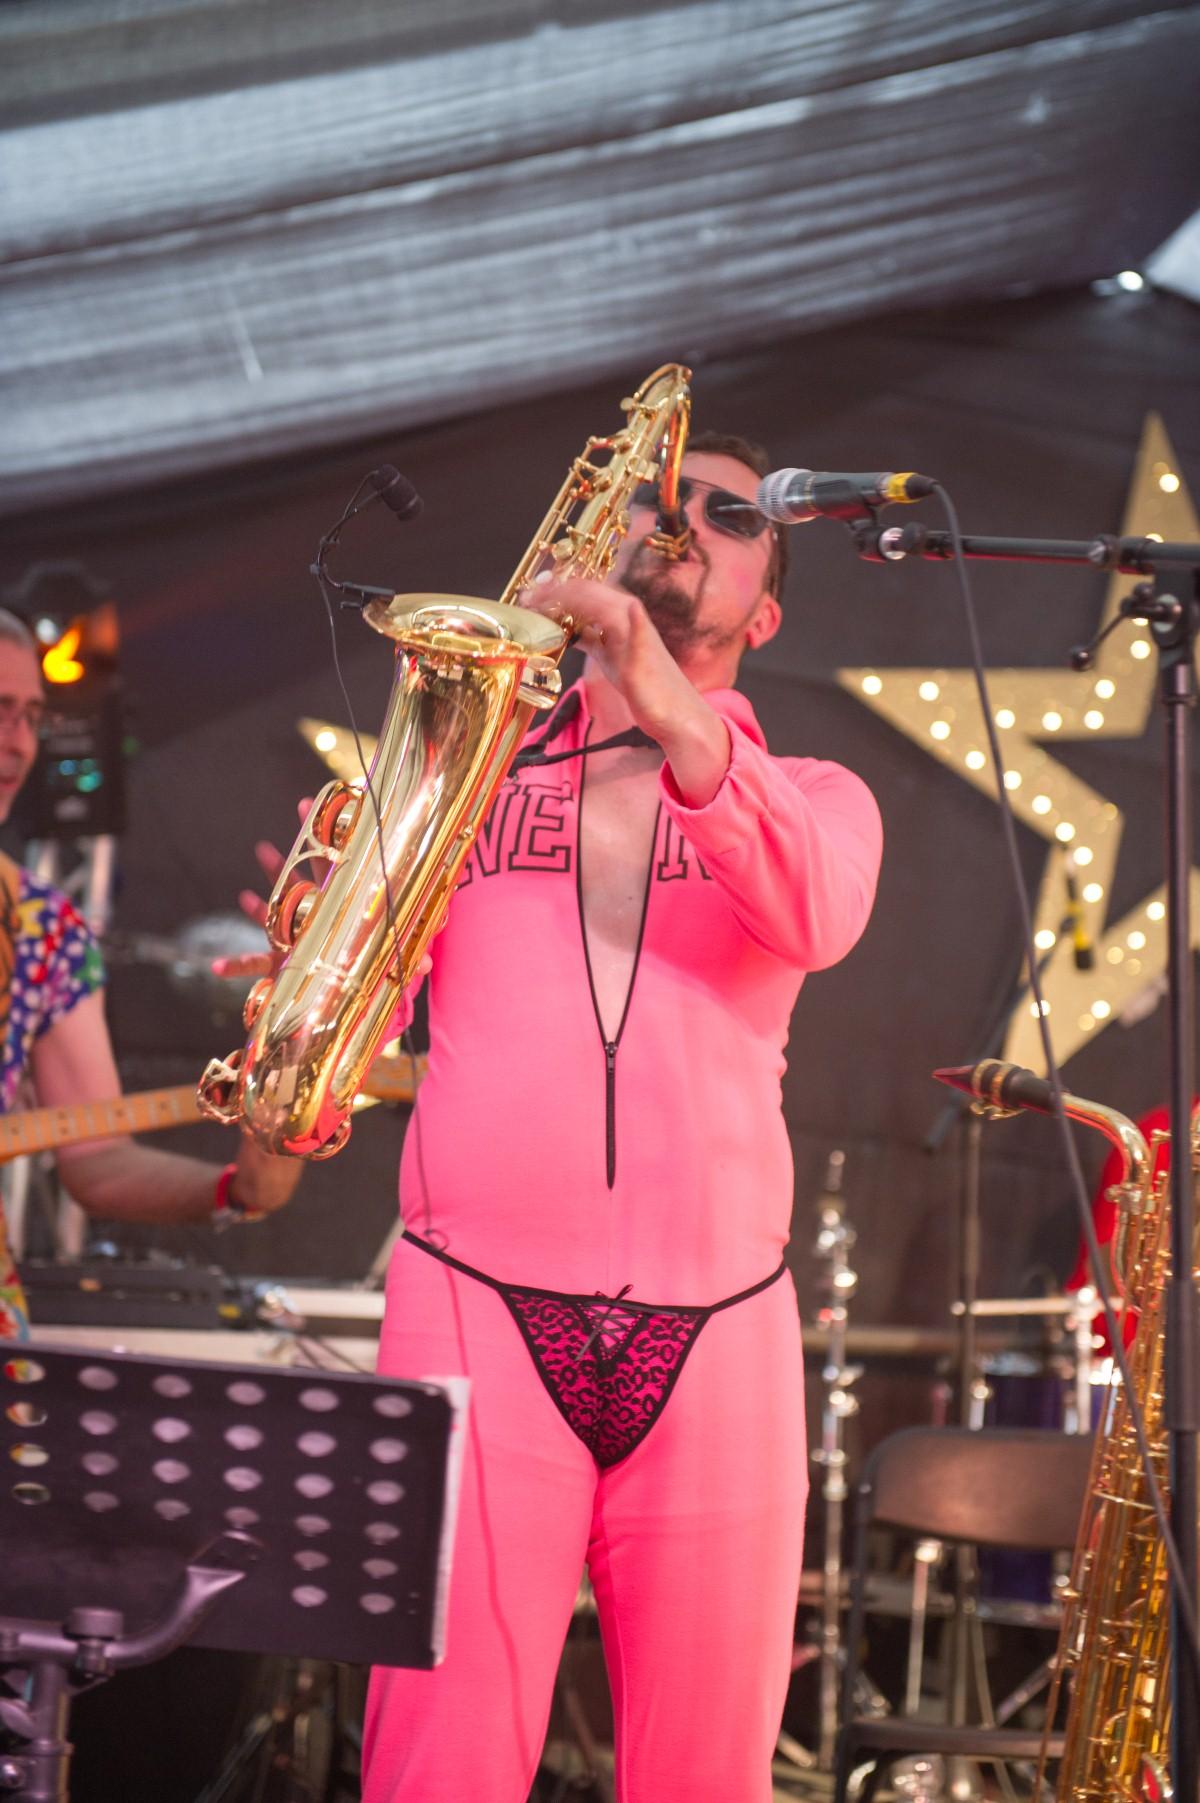 Image from Boomtown Festival 2013